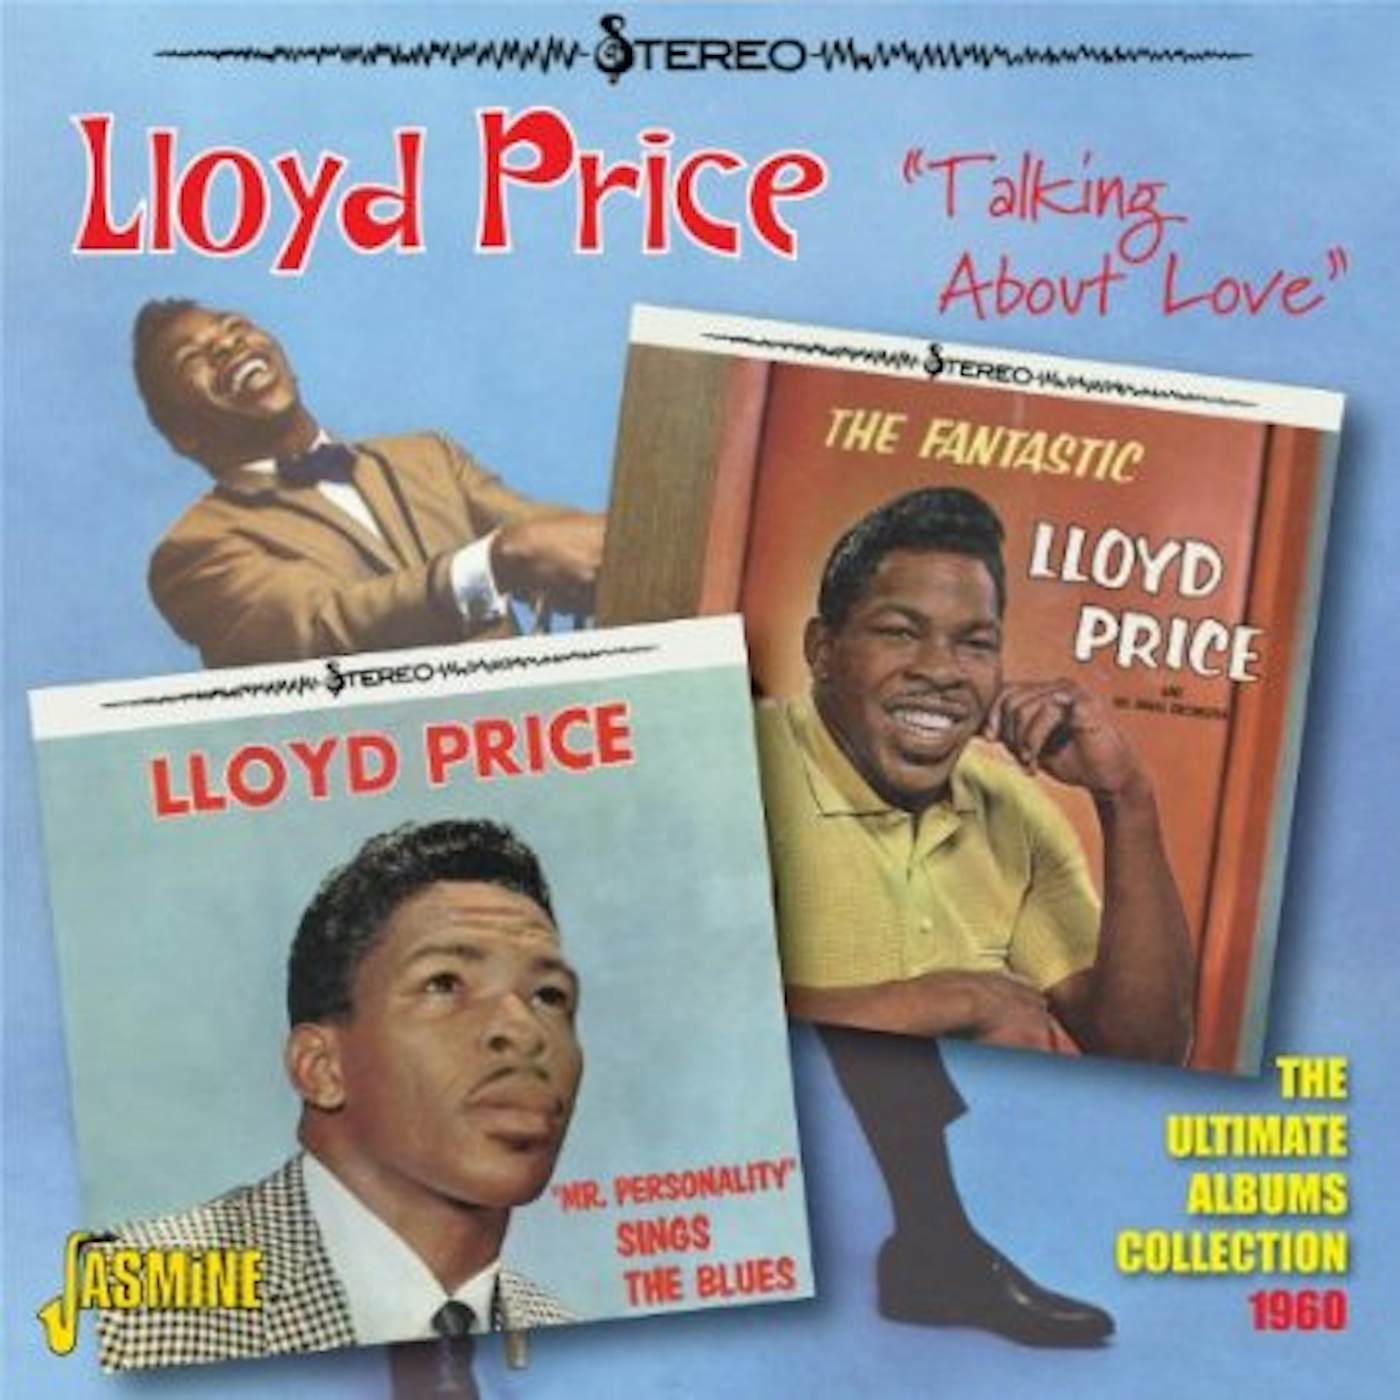 Lloyd Price TALKING ABOUT LOVE CD